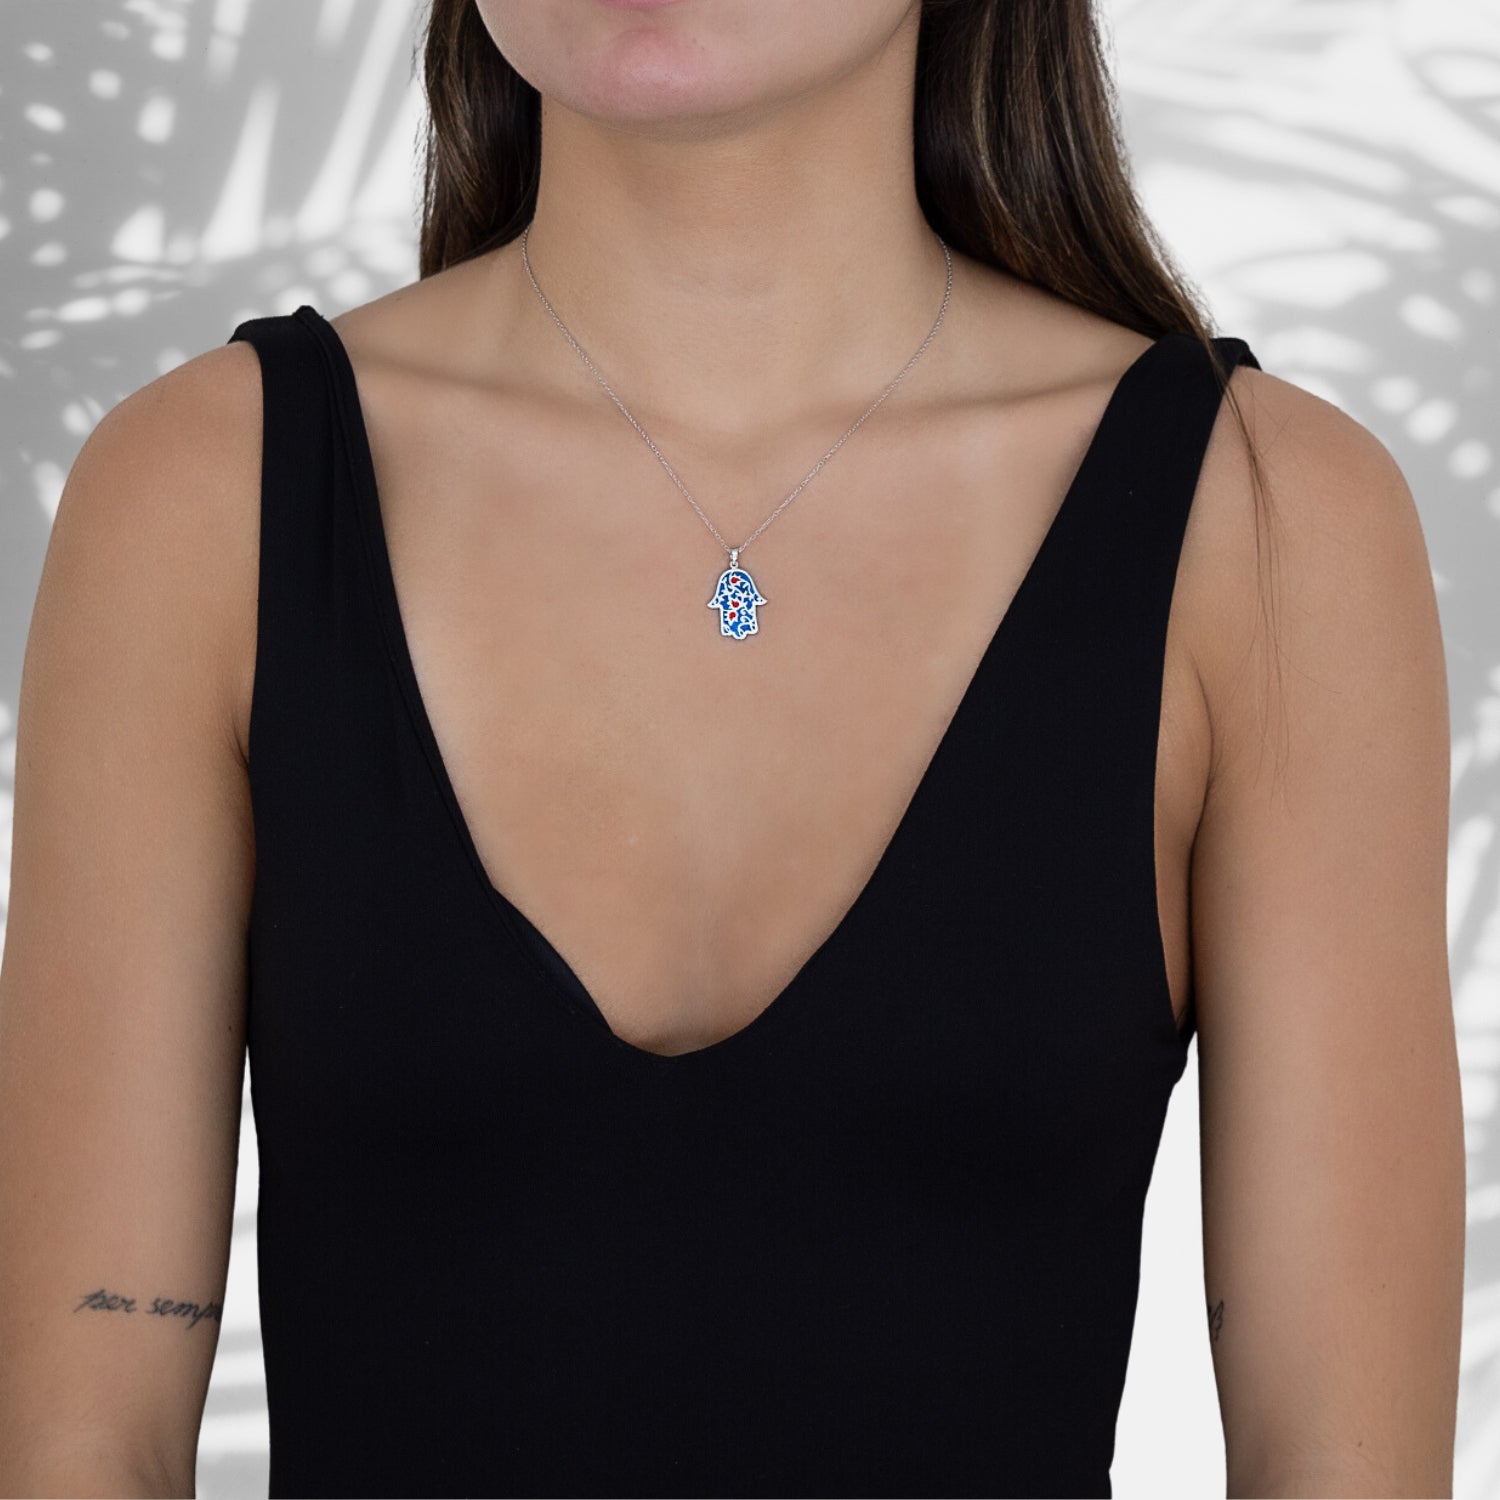 A model wearing the Good Vibes Enamel Hamsa Necklace Silver, radiating positive energy and style.